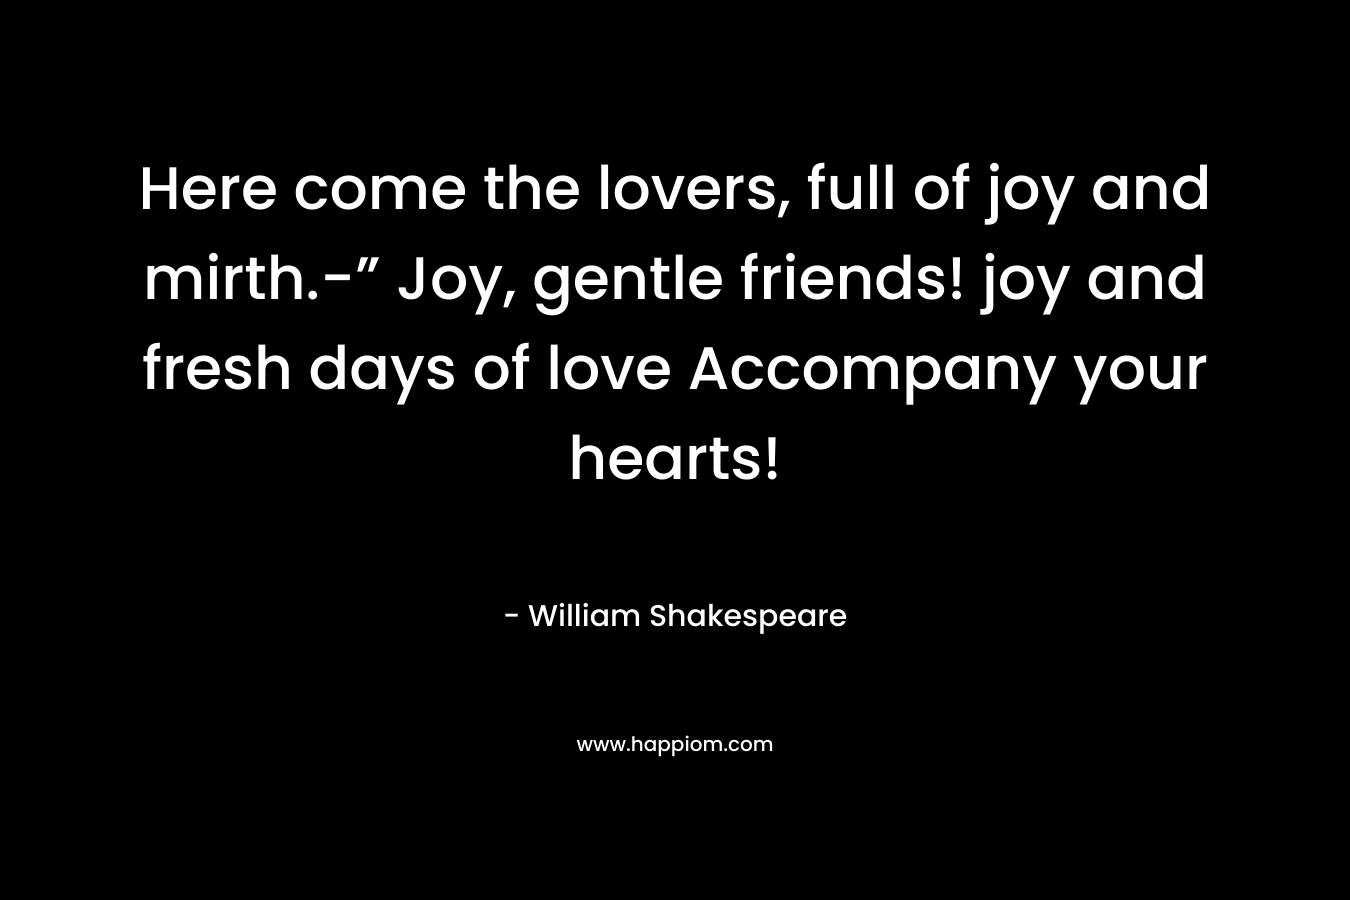 Here come the lovers, full of joy and mirth.-” Joy, gentle friends! joy and fresh days of love Accompany your hearts!